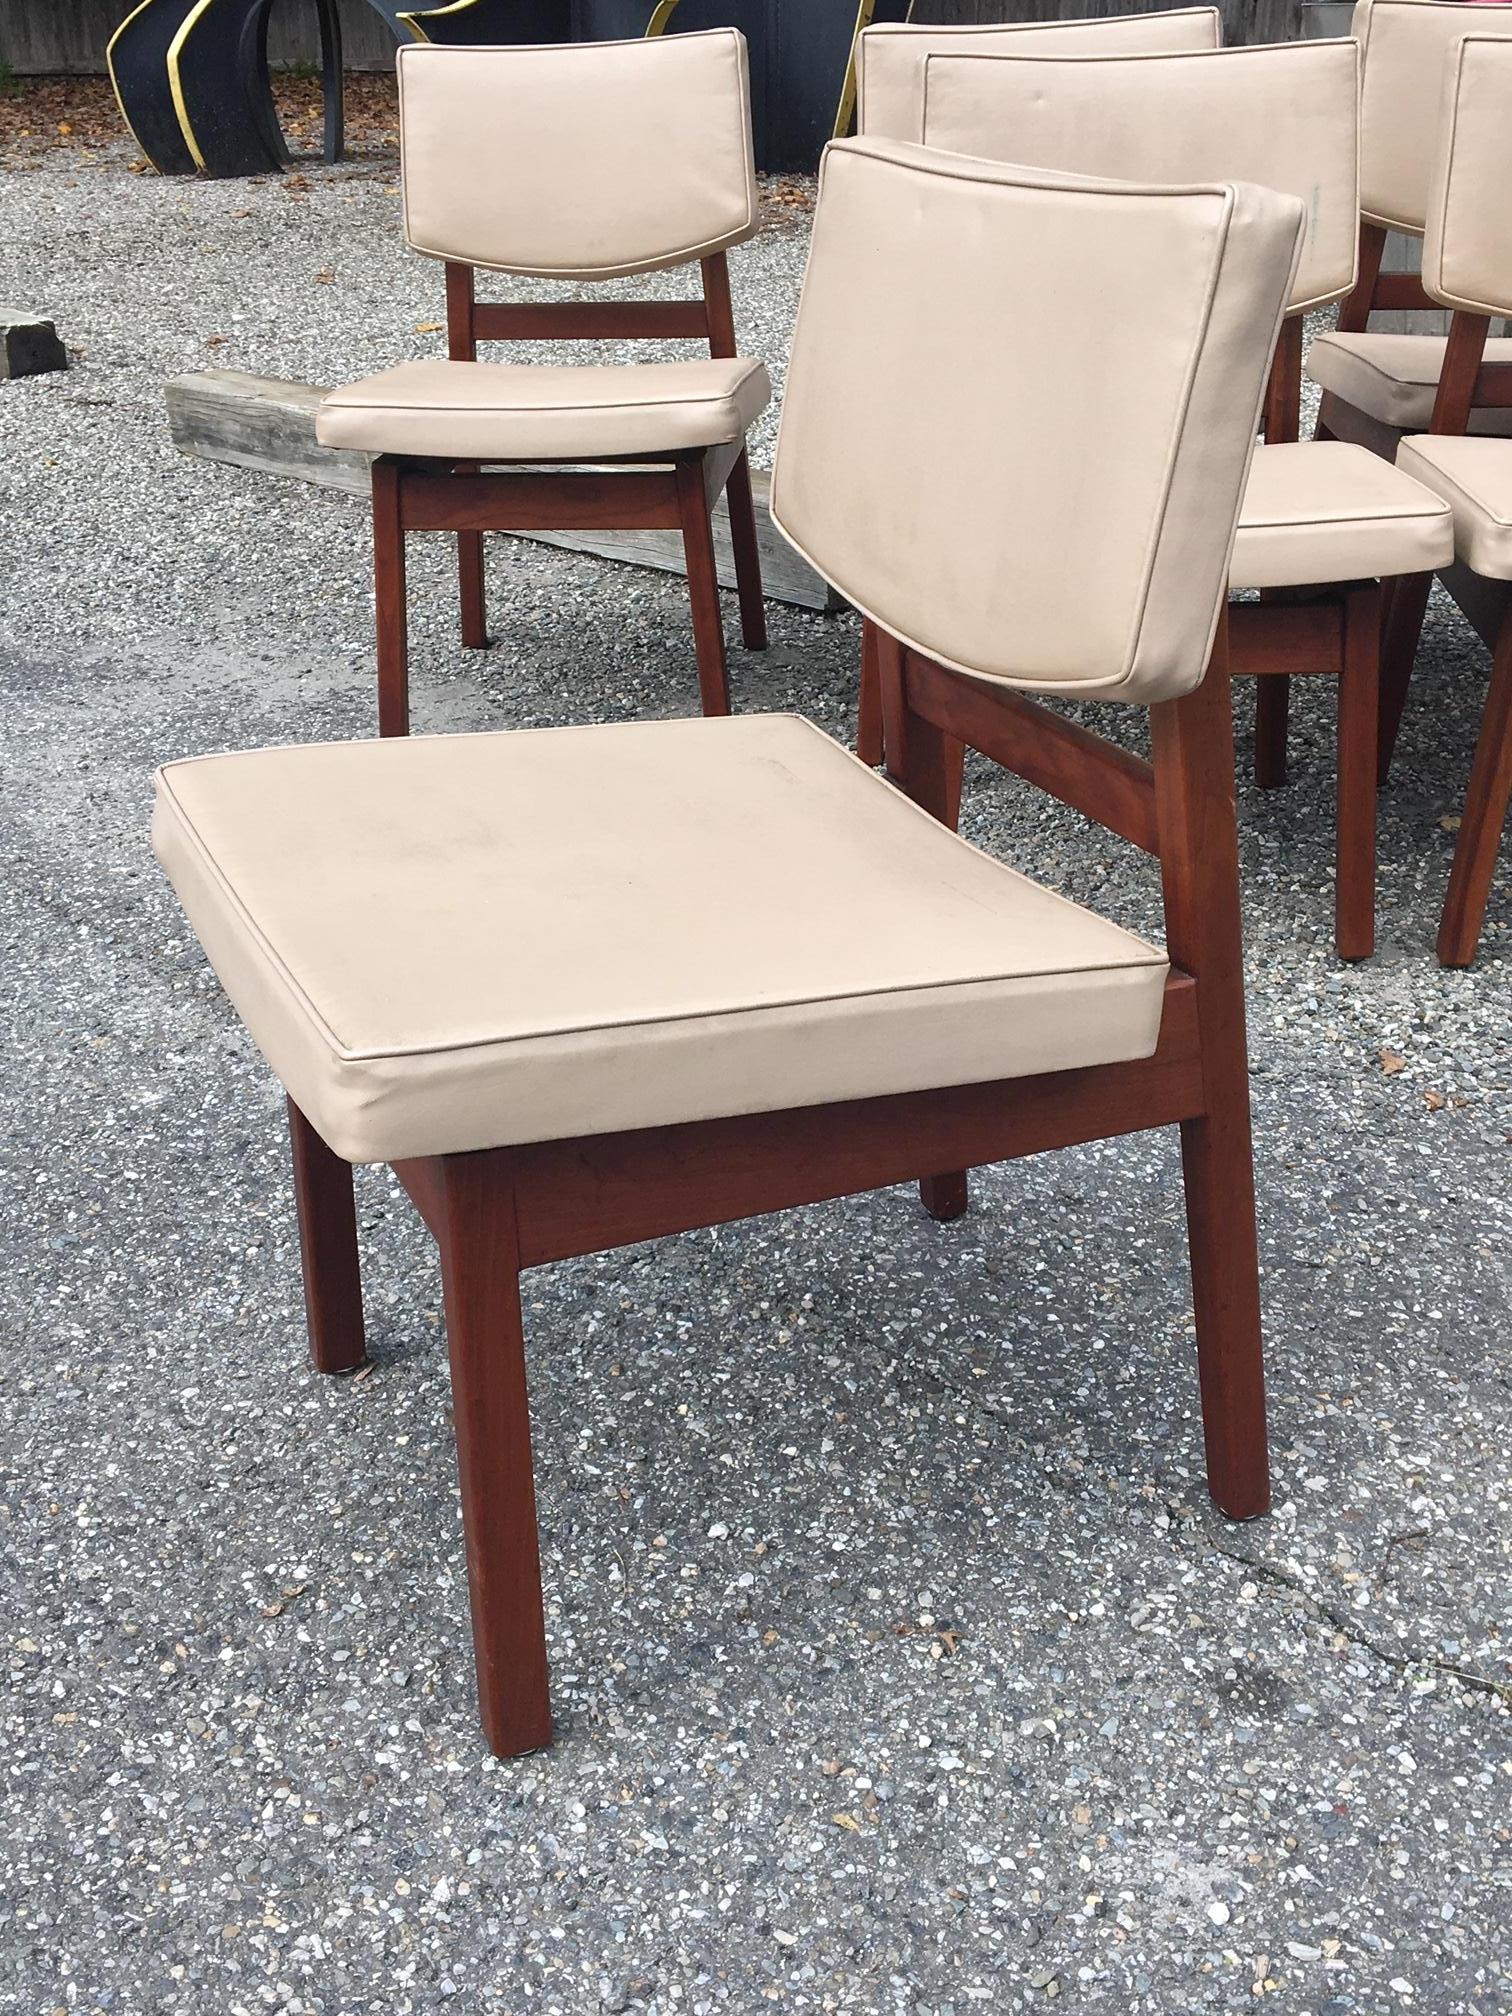 American Set of 8 Original Jens Risom Walnut Dining Chairs in Original Leather Upholstery